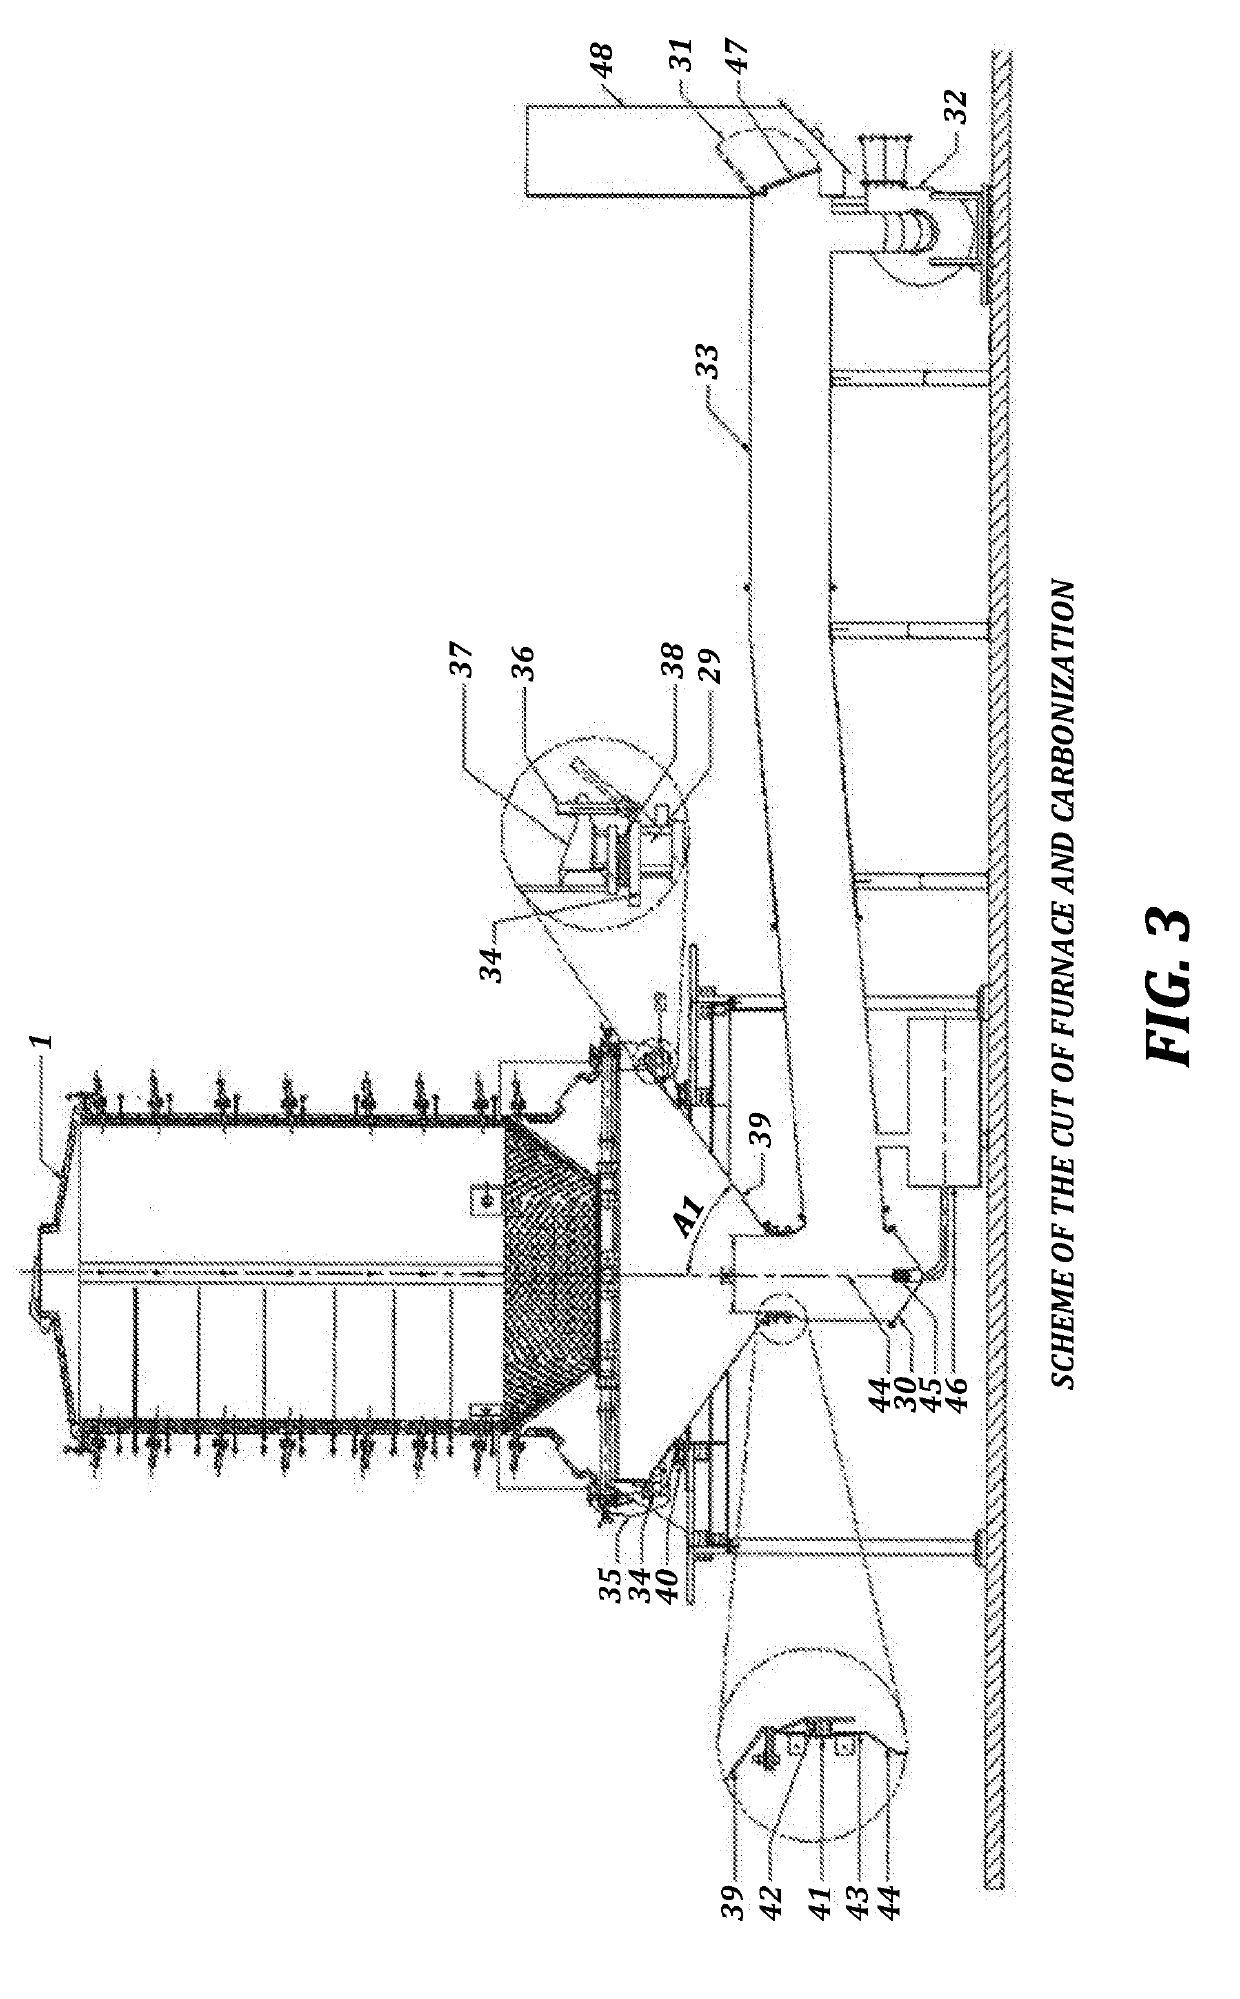 Industrial process using a forced-exhaust metal furnace and mechanisms developed for simultaneously producing coal, fuel gas, pyroligneous extract and tar